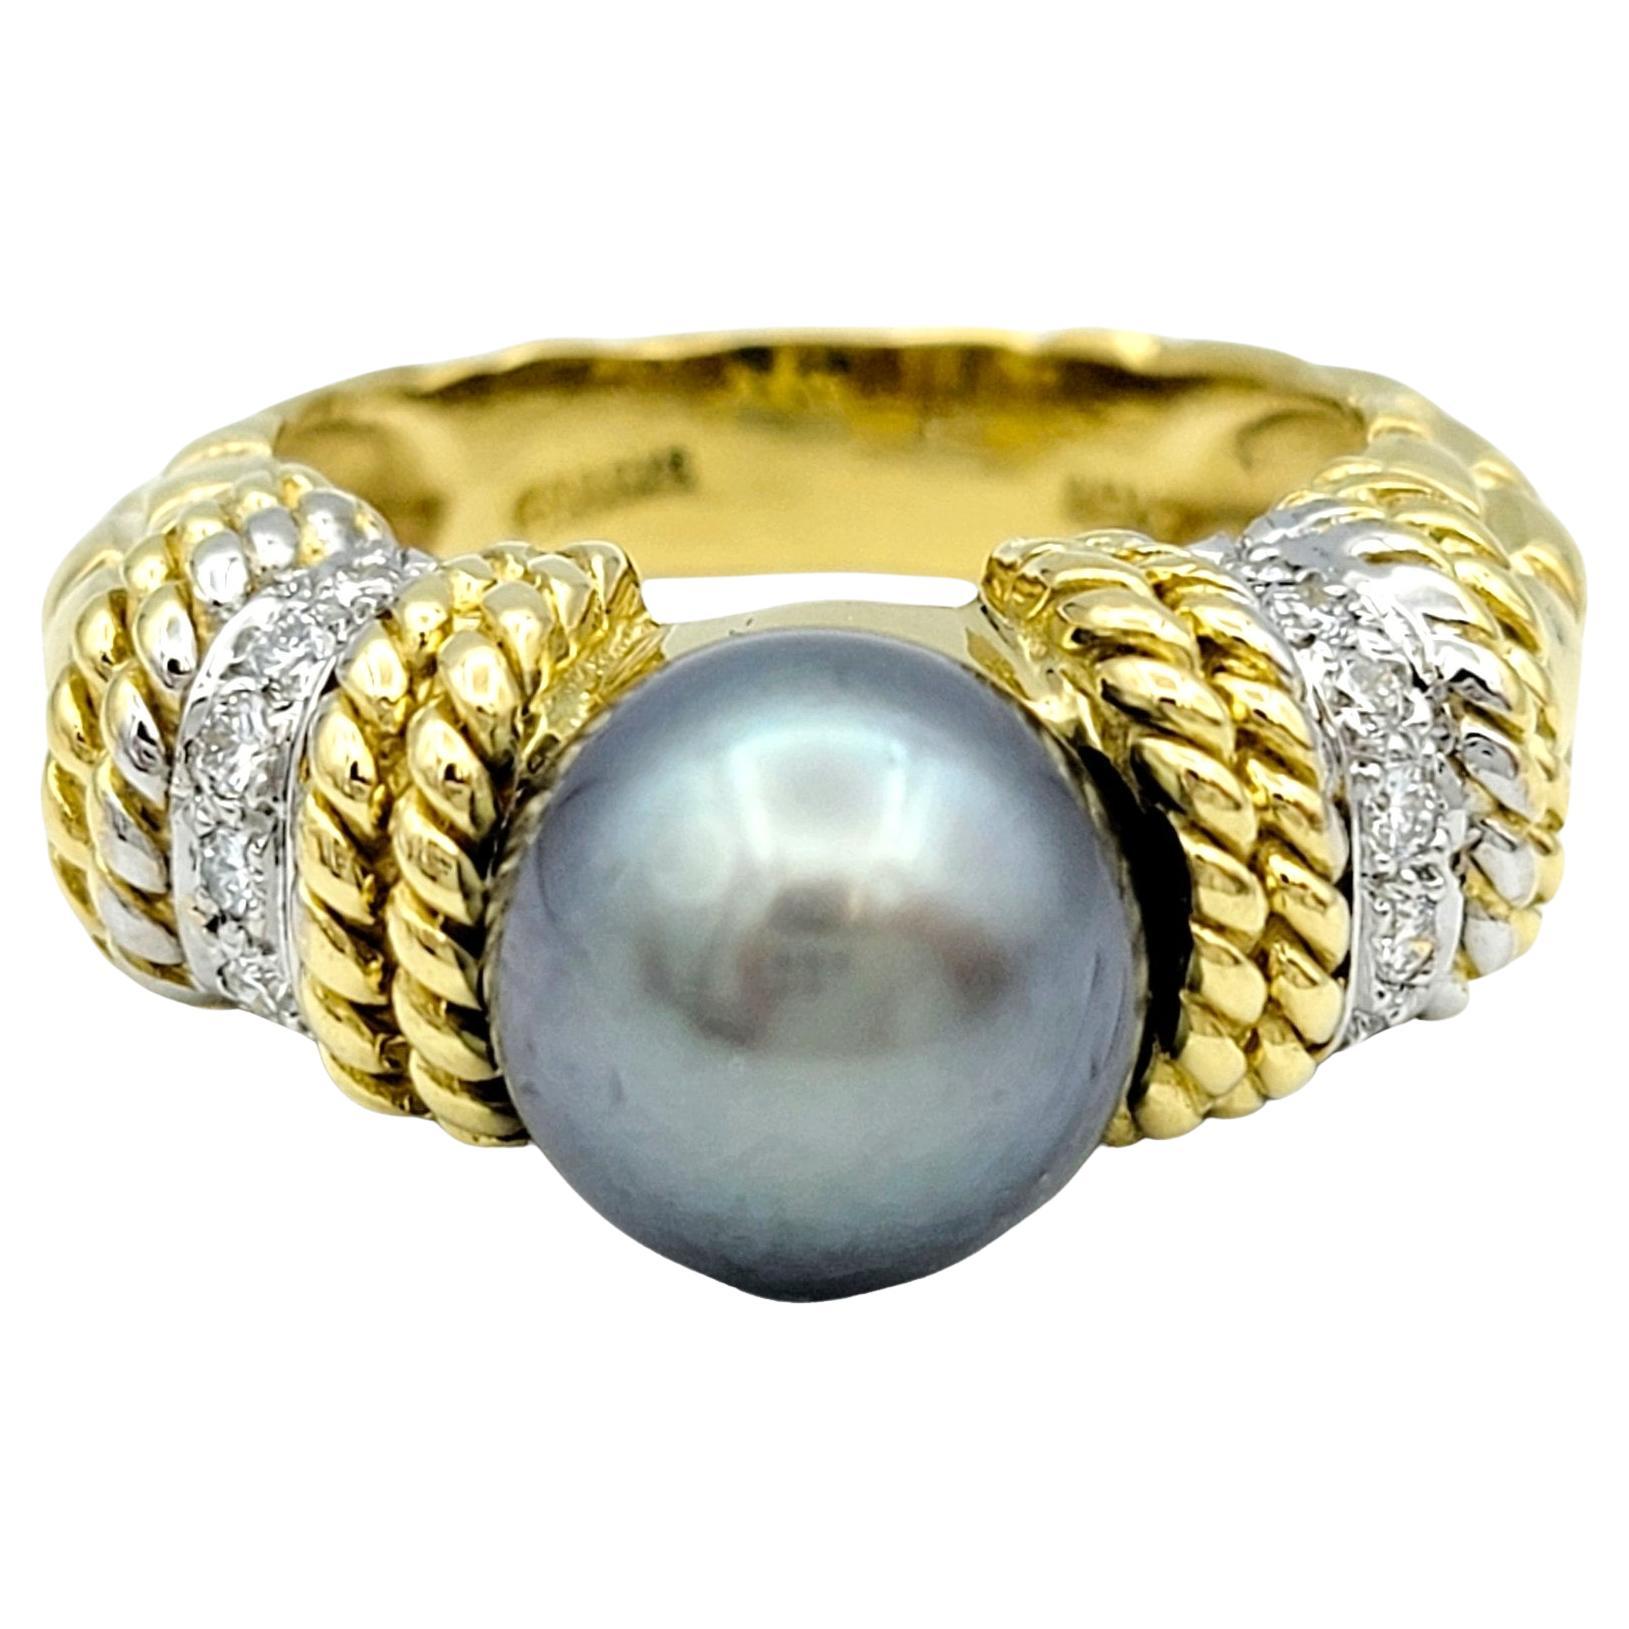 Cassis 9.5 mm Tahitian Pearl and Diamond Ring Set in 18 Karat Yellow Gold 